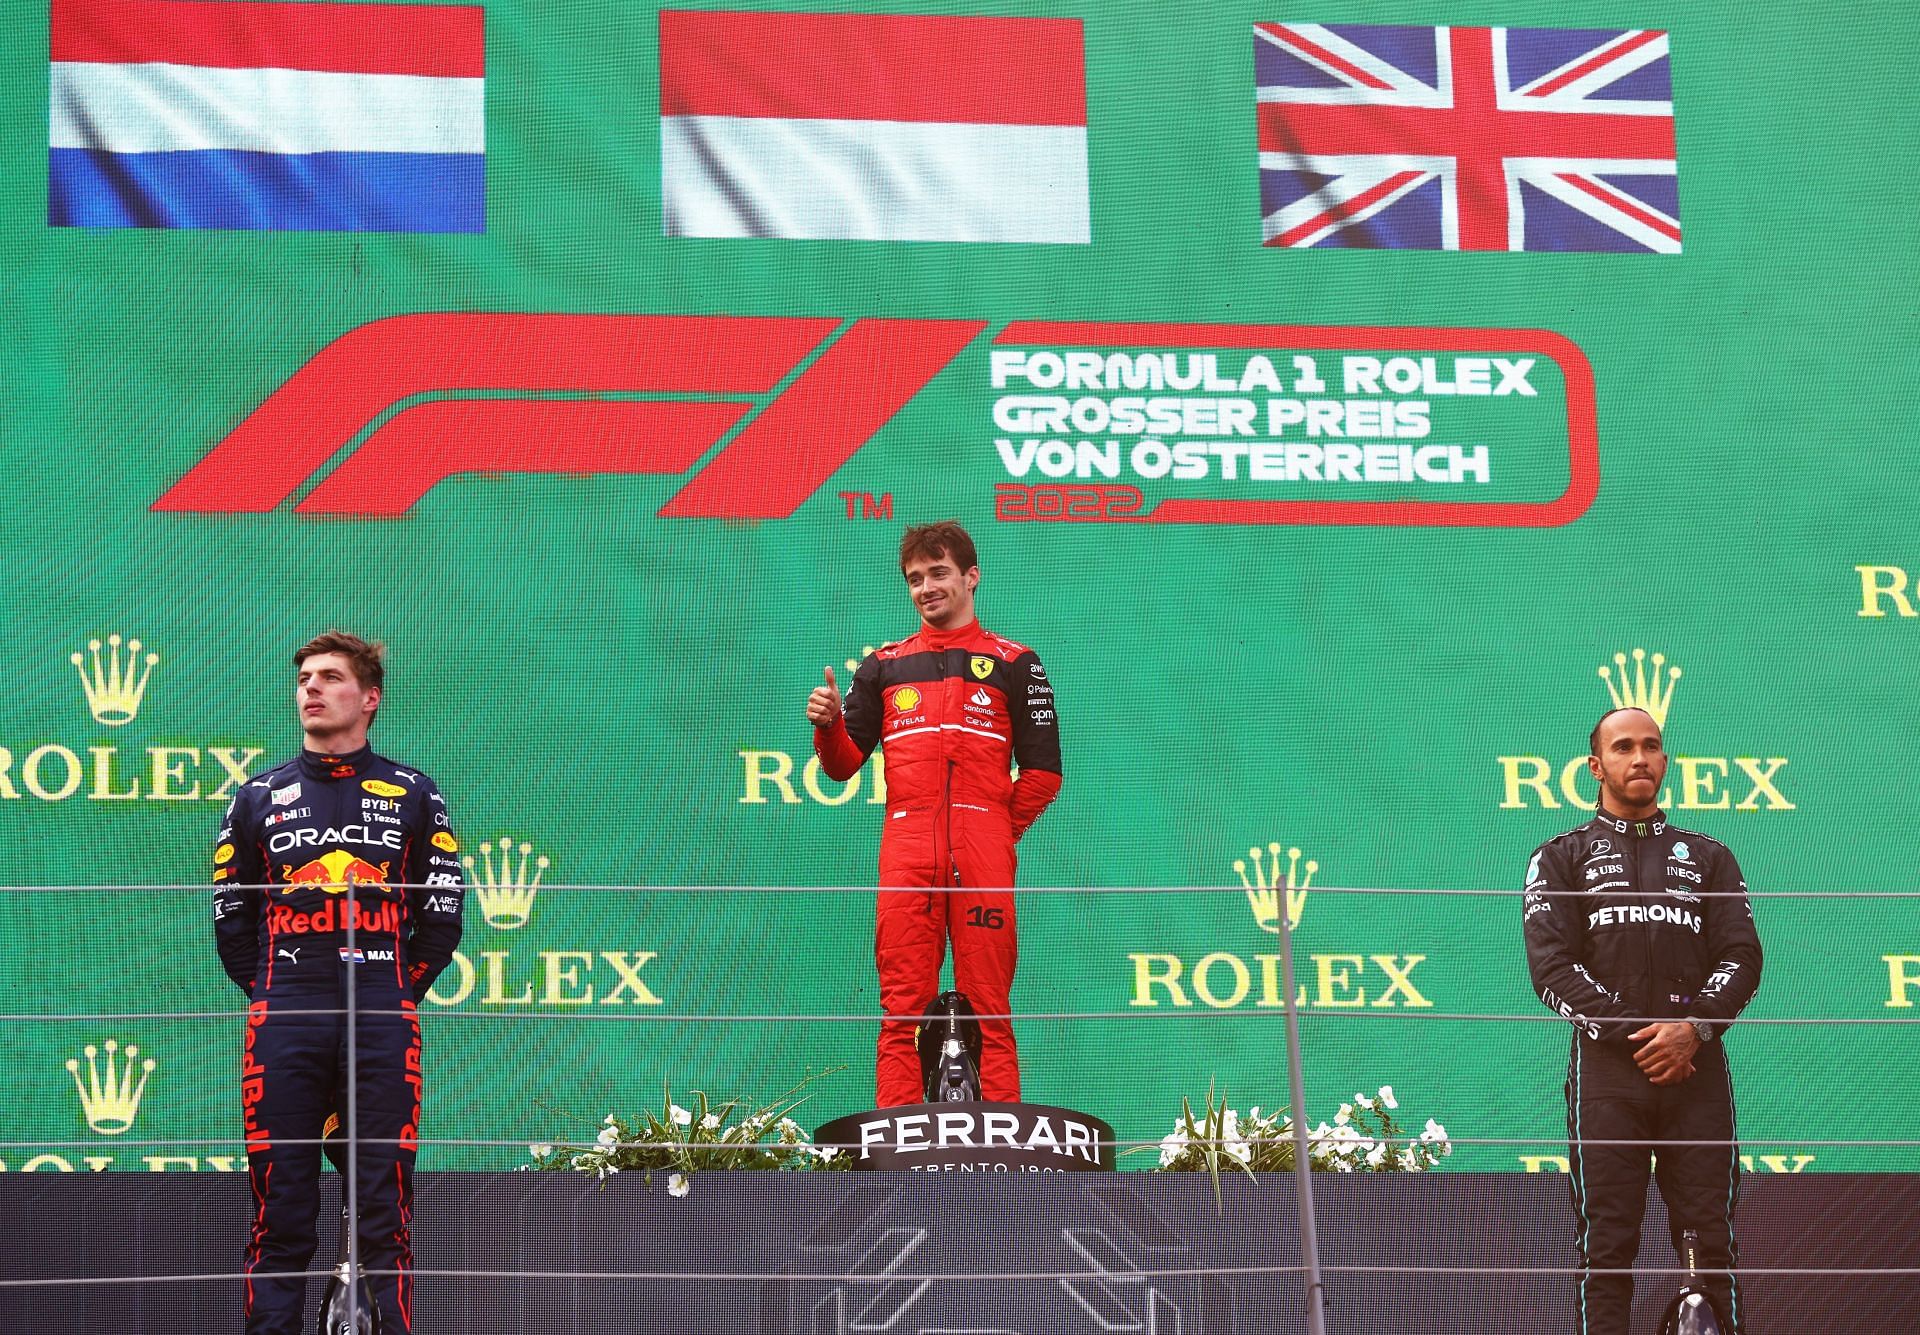 (From L to R) Red Bull&#039;s Max Verstappen, Ferrari&#039;s Charles Leclerc, and Mercedes&#039; Lewis Hamilton on the podium at the 2022 F1 Austrian GP (Photo by Clive Rose/Getty Images)